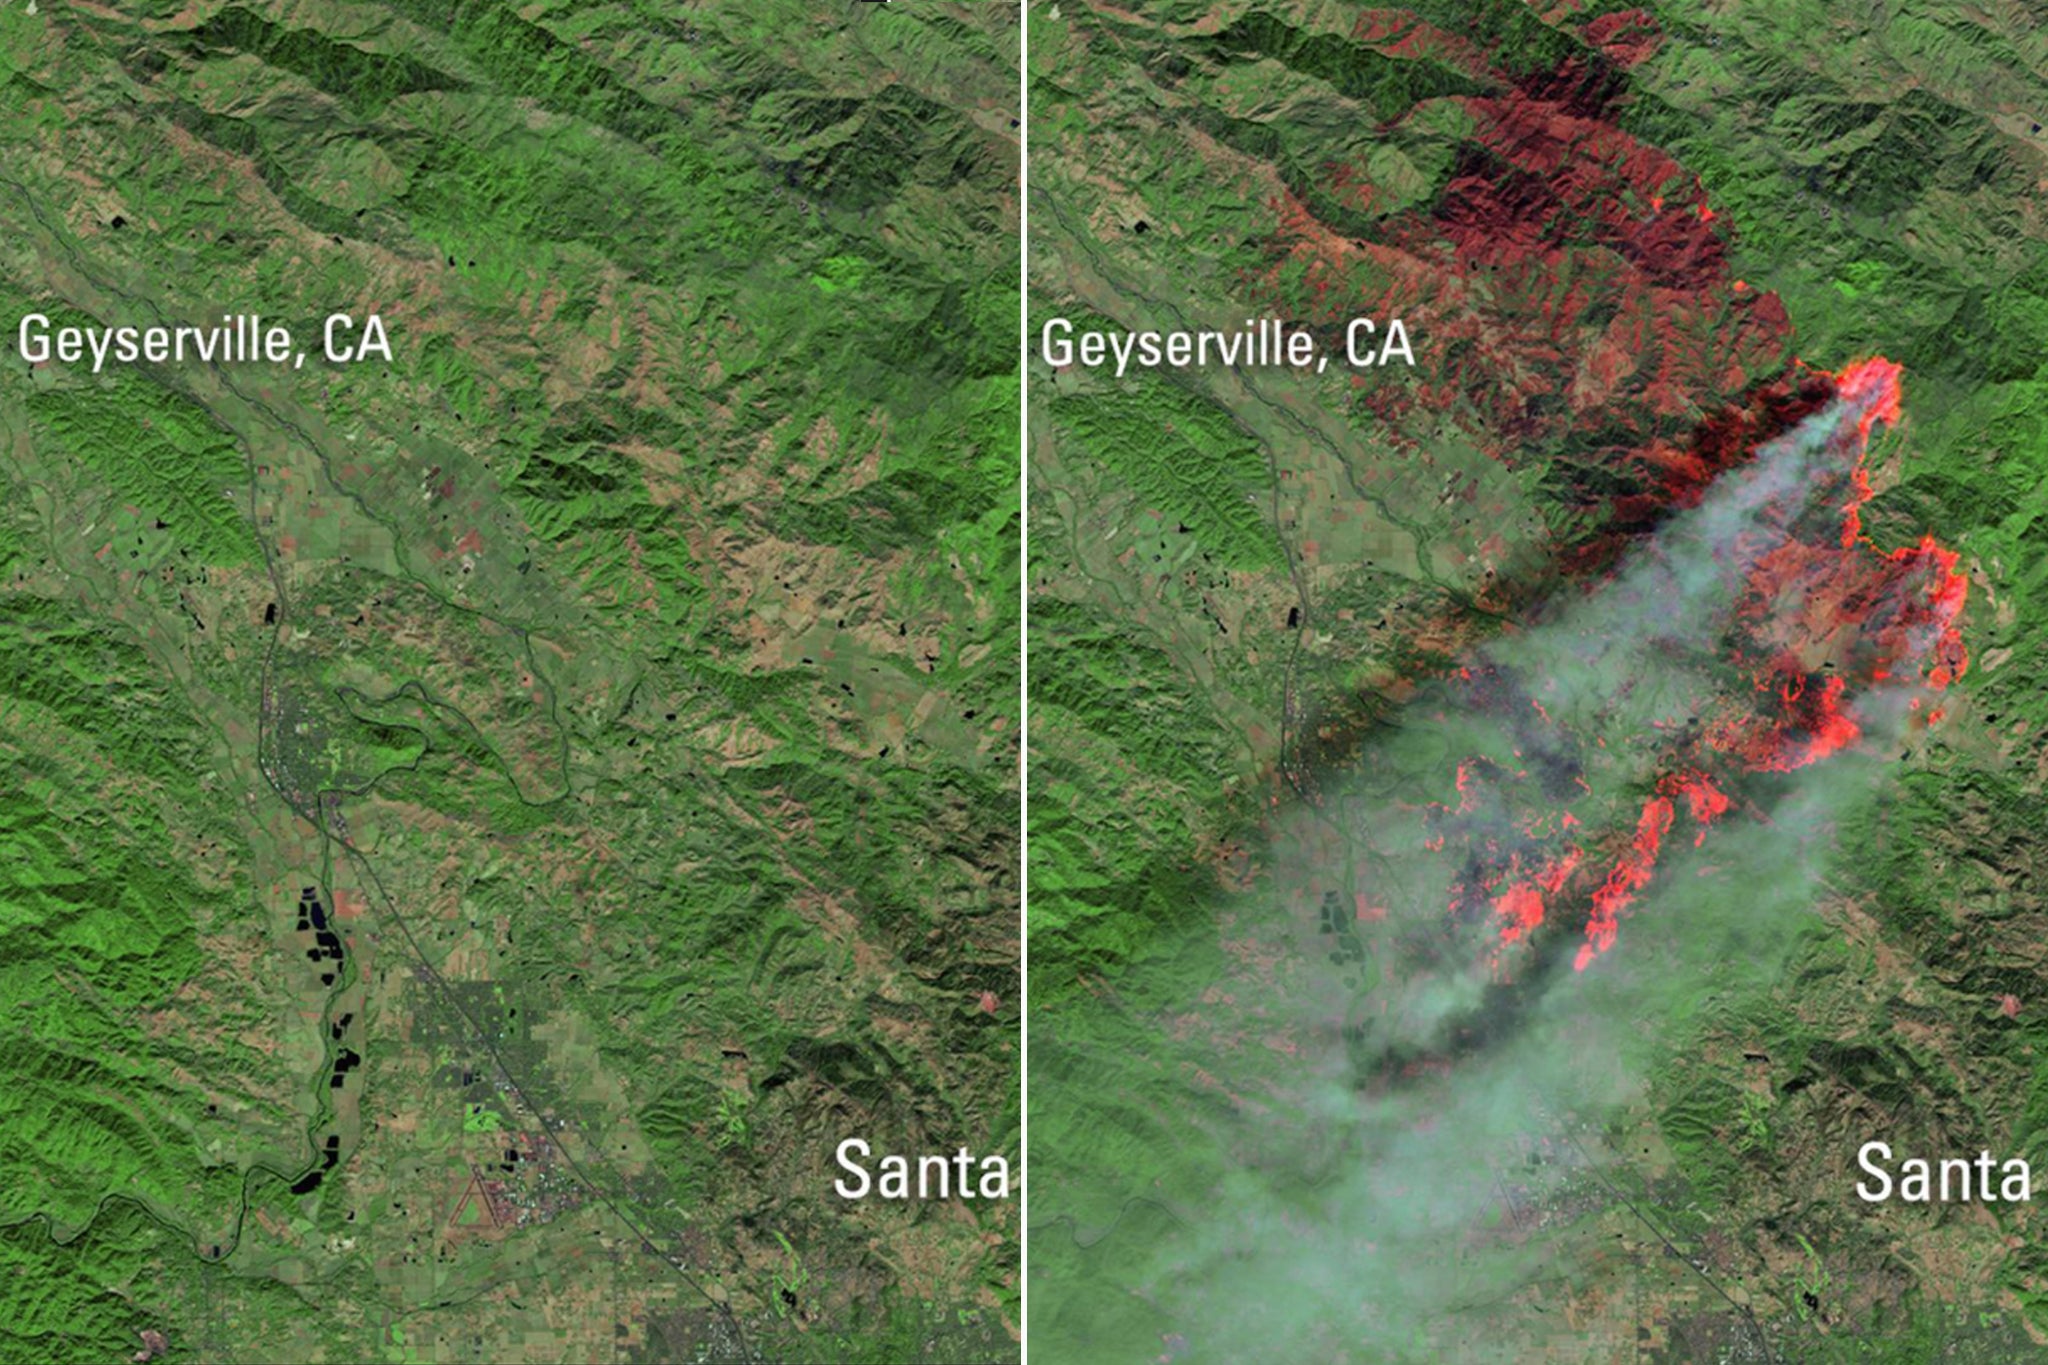 Pictures taken before and during the Kincade wildfire in California, which burned nearly 78,000 acres